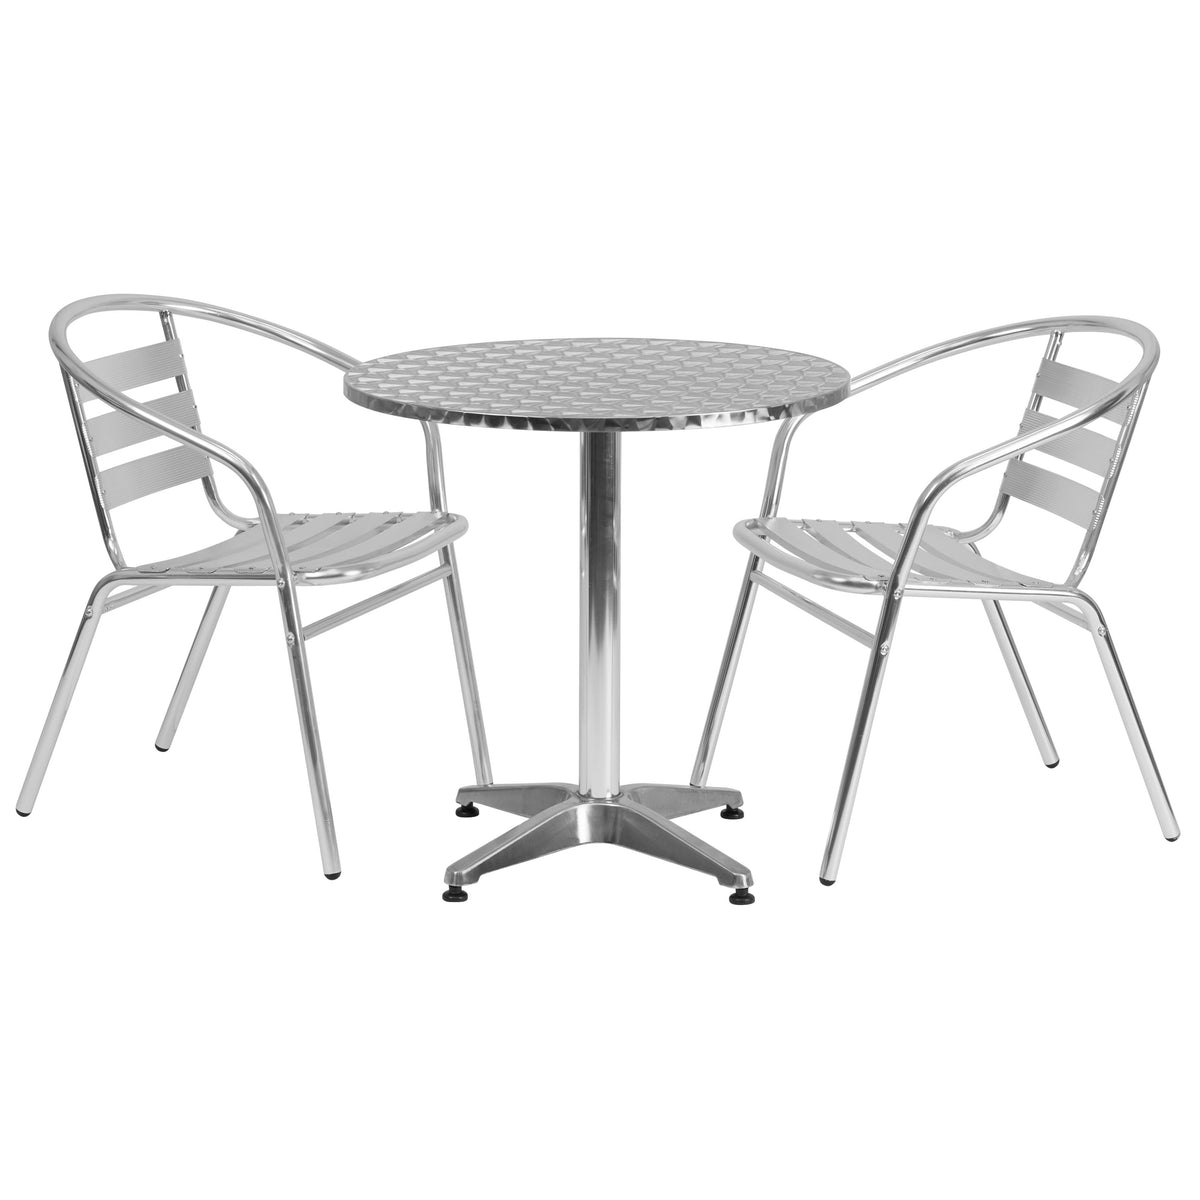 27.5inch Round Aluminum Indoor-Outdoor Table Set with 2 Slat Back Chairs